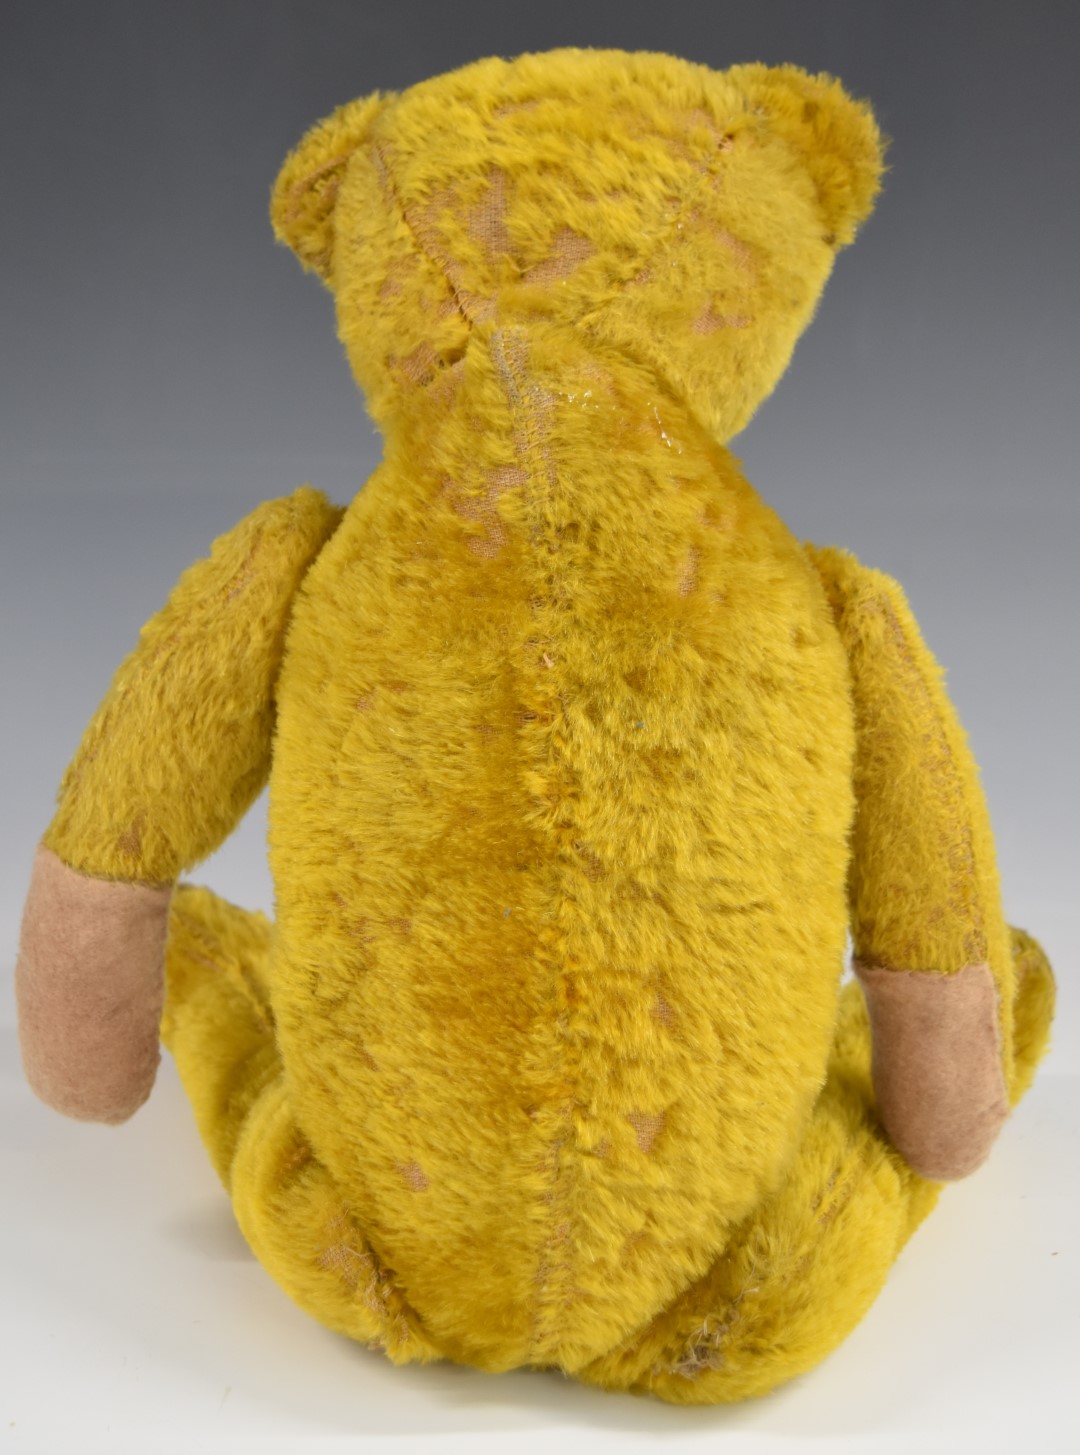 American Teddy bear with golden mohair, straw filling, disc joints, felt pads and stitched features, - Image 2 of 3